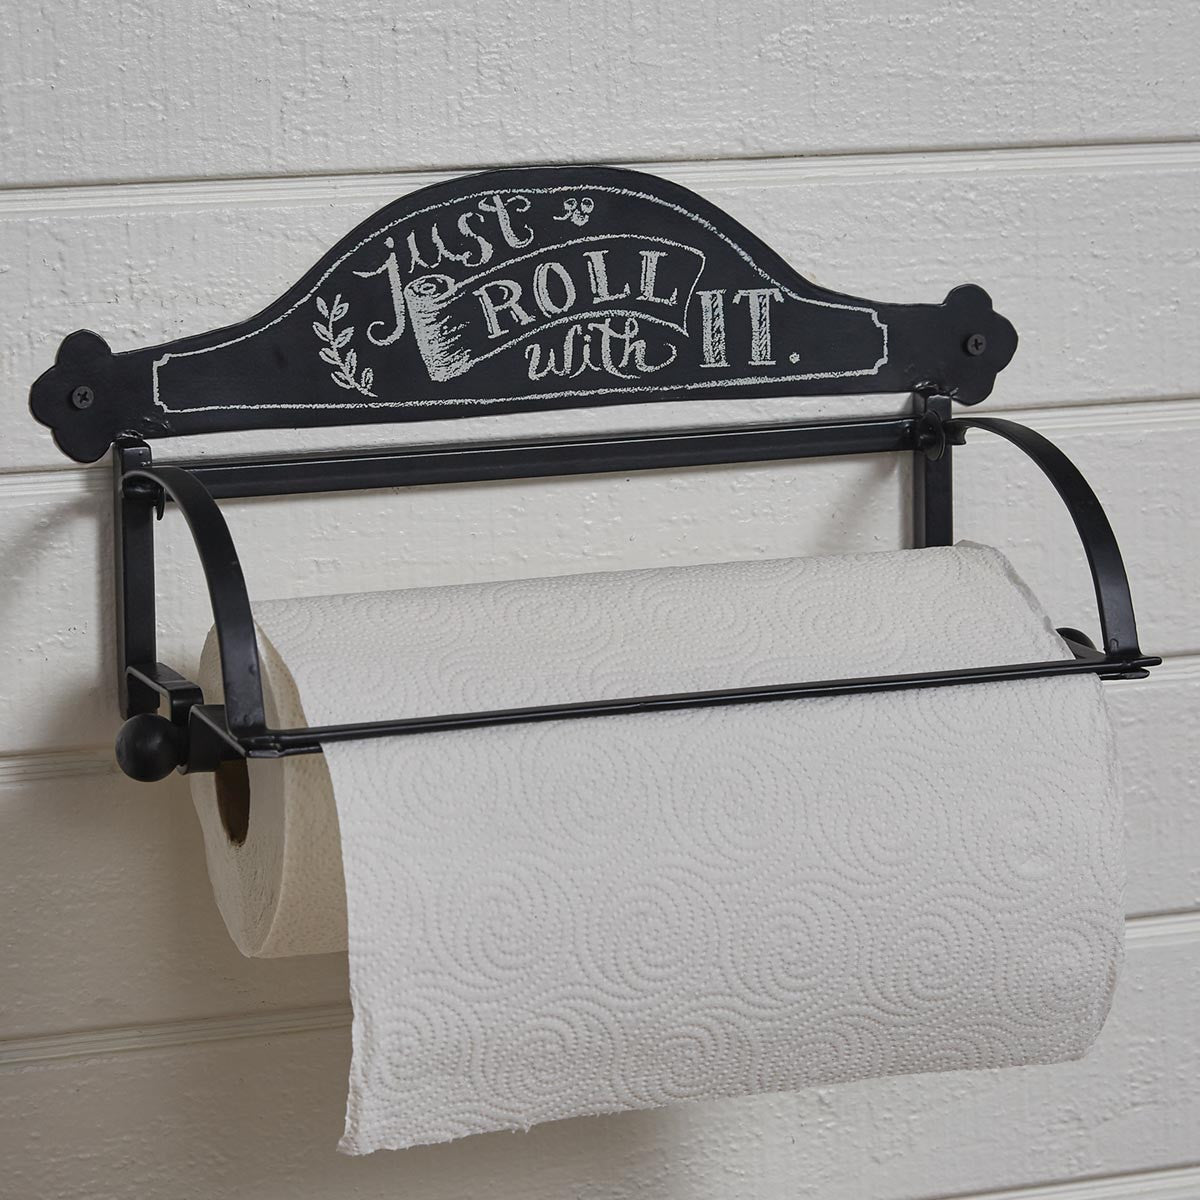 Your Heart's Delight Wash and Dry Paper Towel Holder, Brown, Iron